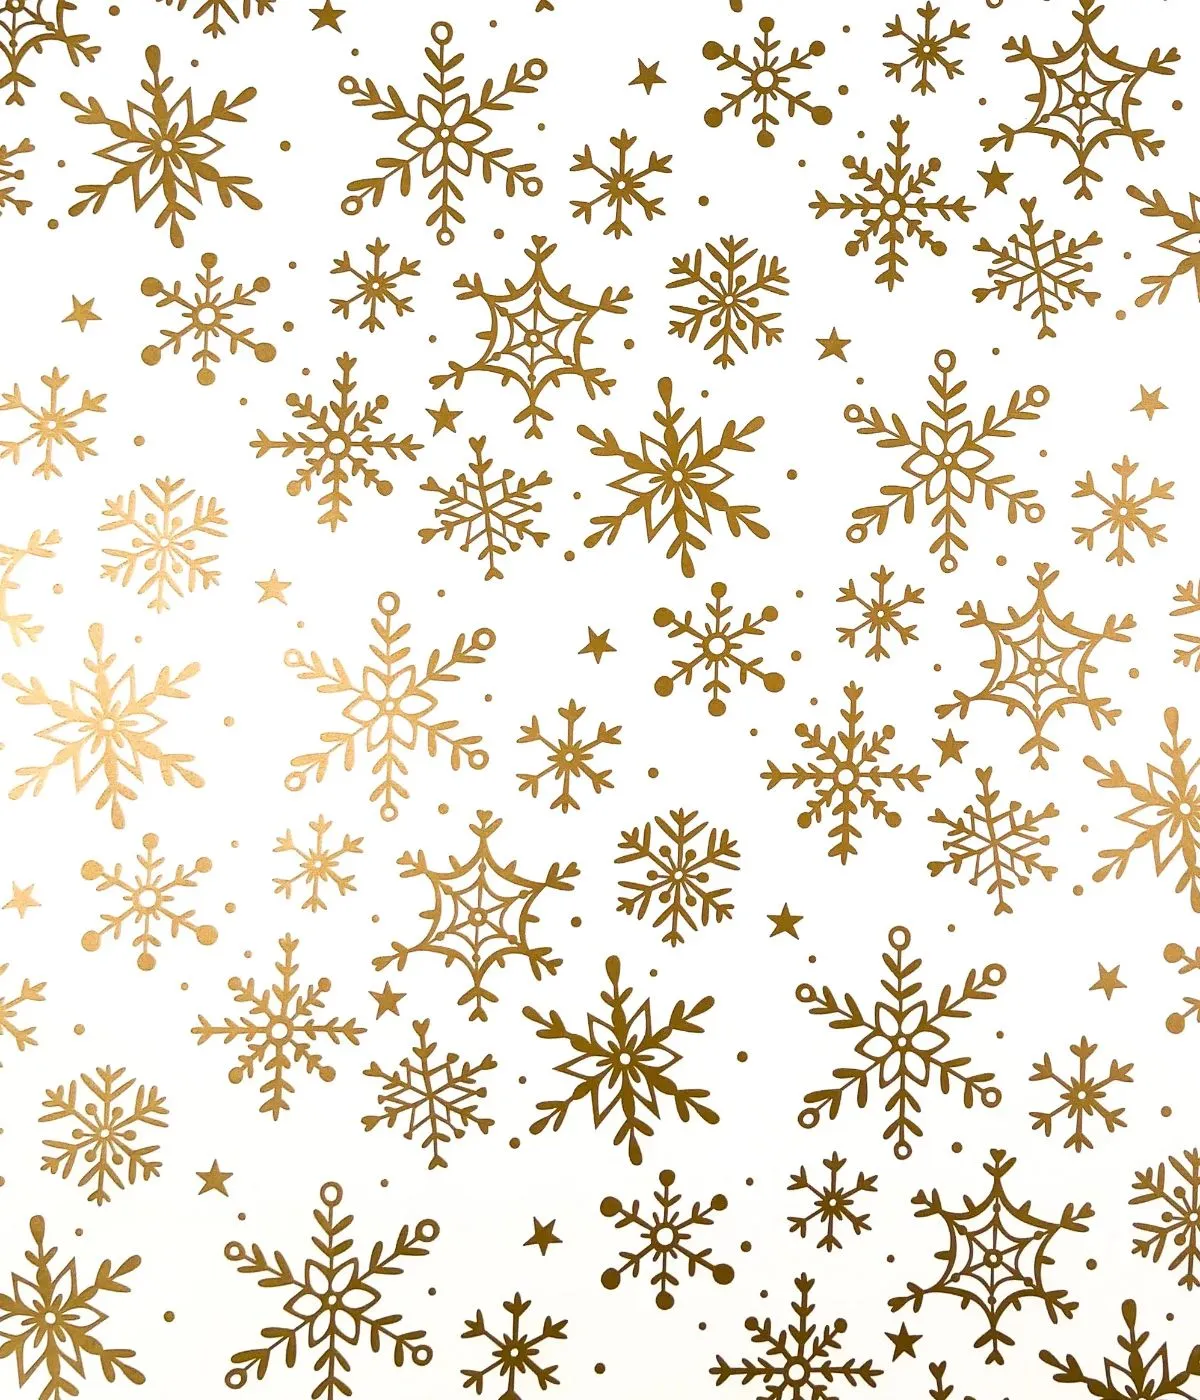 WRAPPING PAPER SNOWFLAKES GOLD ️☃️